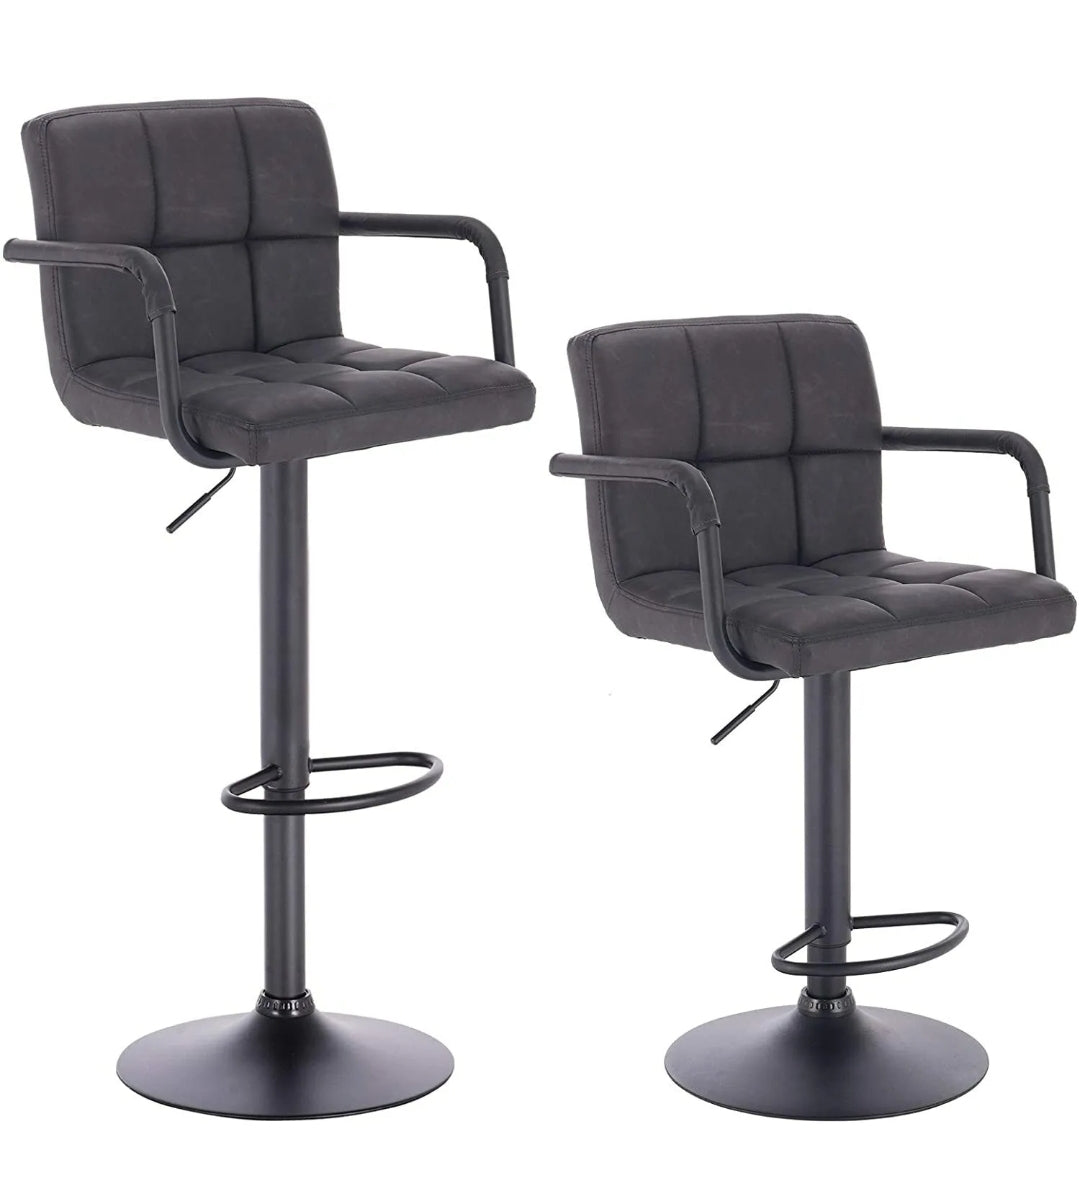 Pu leather bar stools. Set of 2. Black or brown